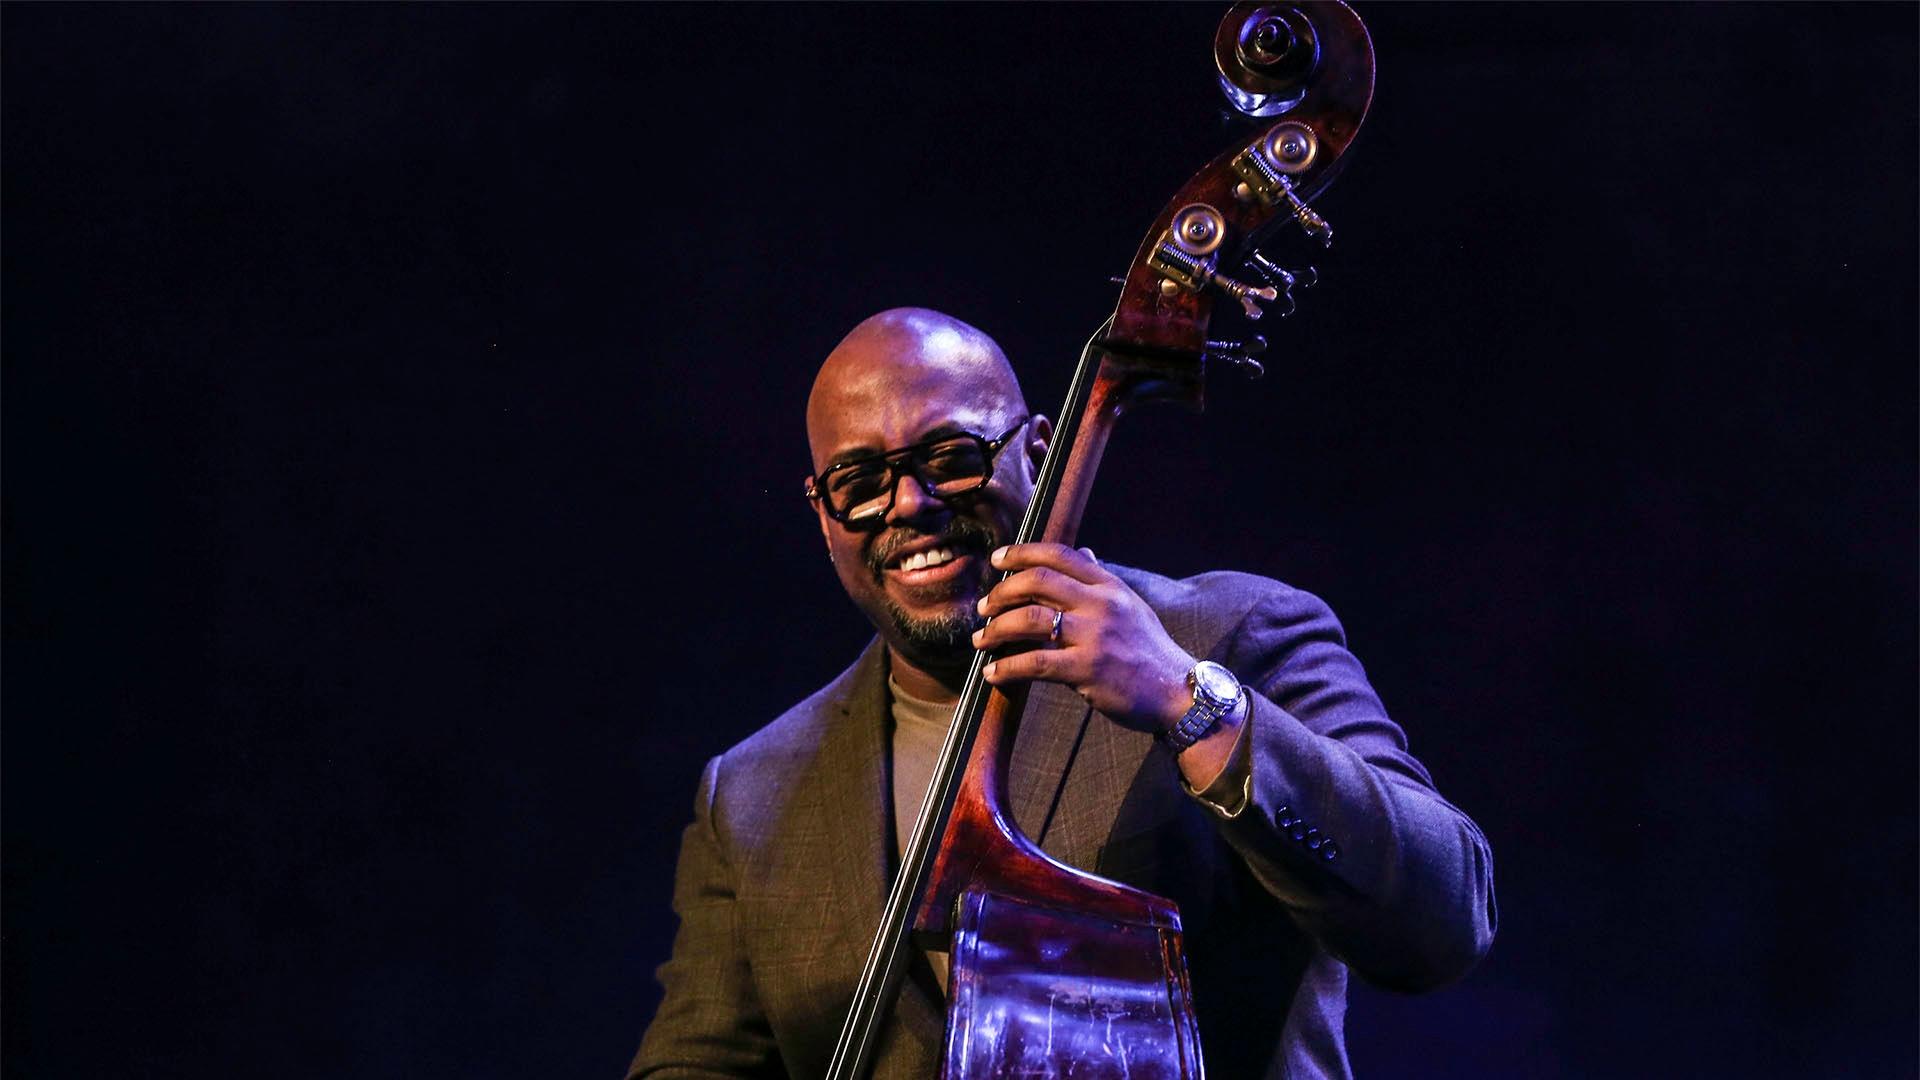 Portrait image of Christian McBride performing with instrument on stage.